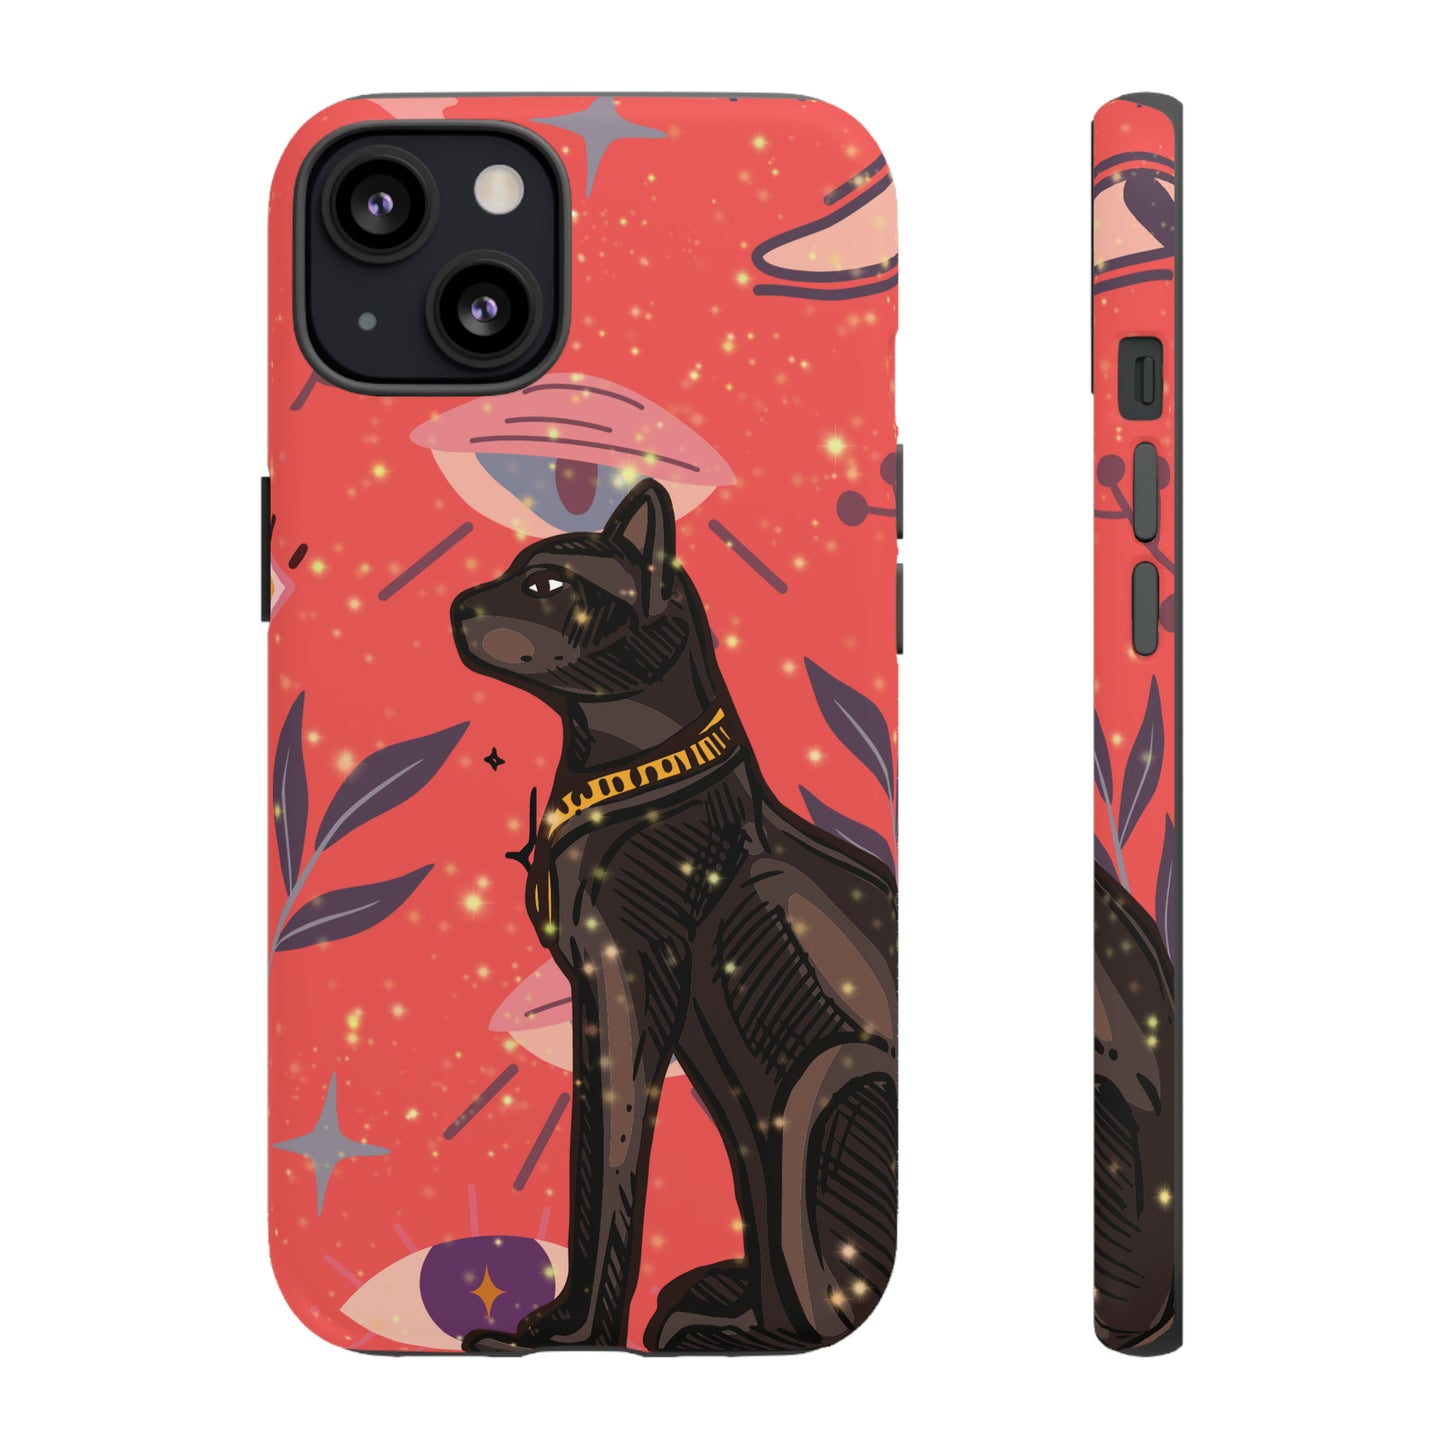 Magic Cat Phone Case Mystery Cat Phone Case Aesthetic Phone Case Cute Tough Cases Smartphone Protection Iphone, Google Pixel, Samsung Galaxy